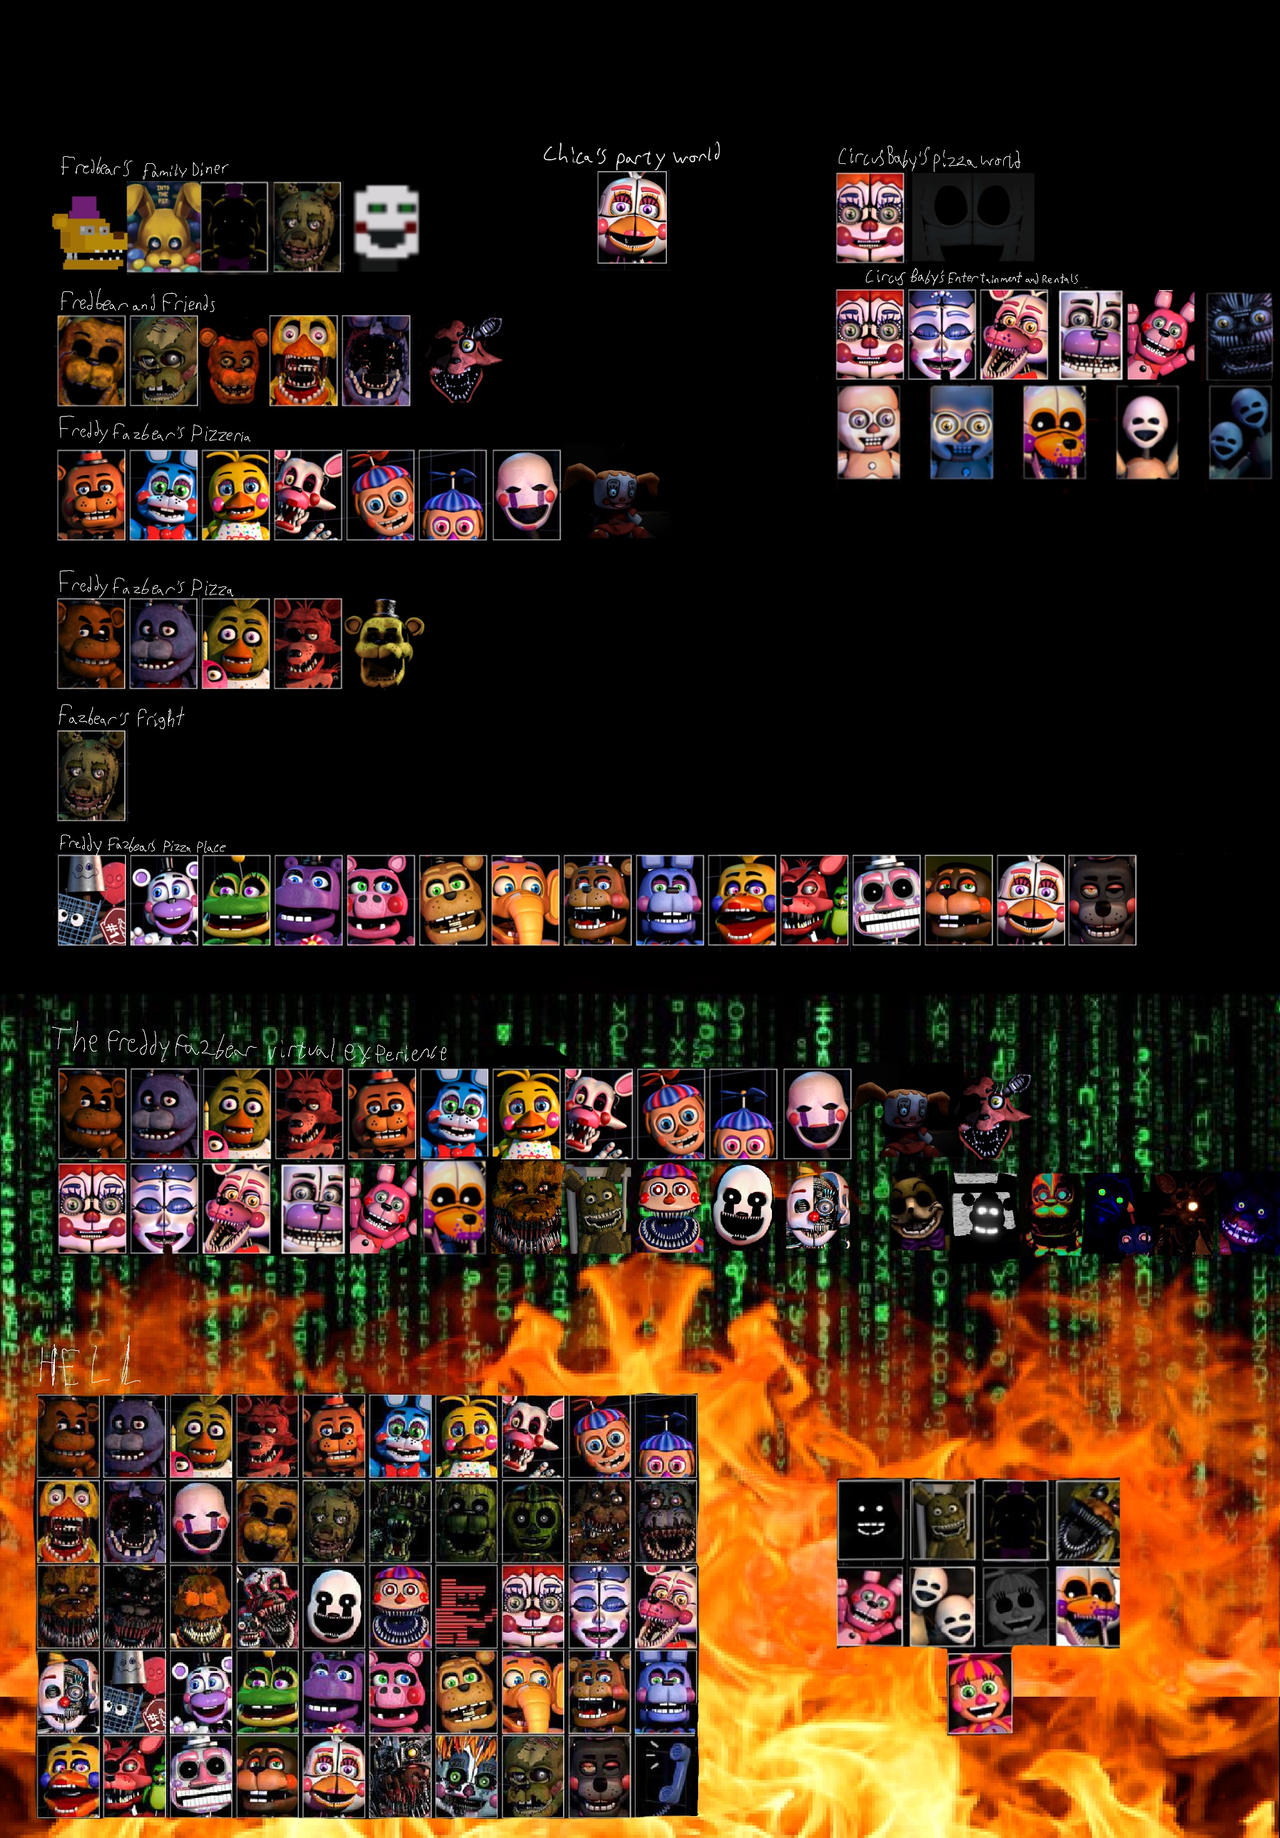 Fnaf 4 Characters Canon by aidenmoonstudios on DeviantArt